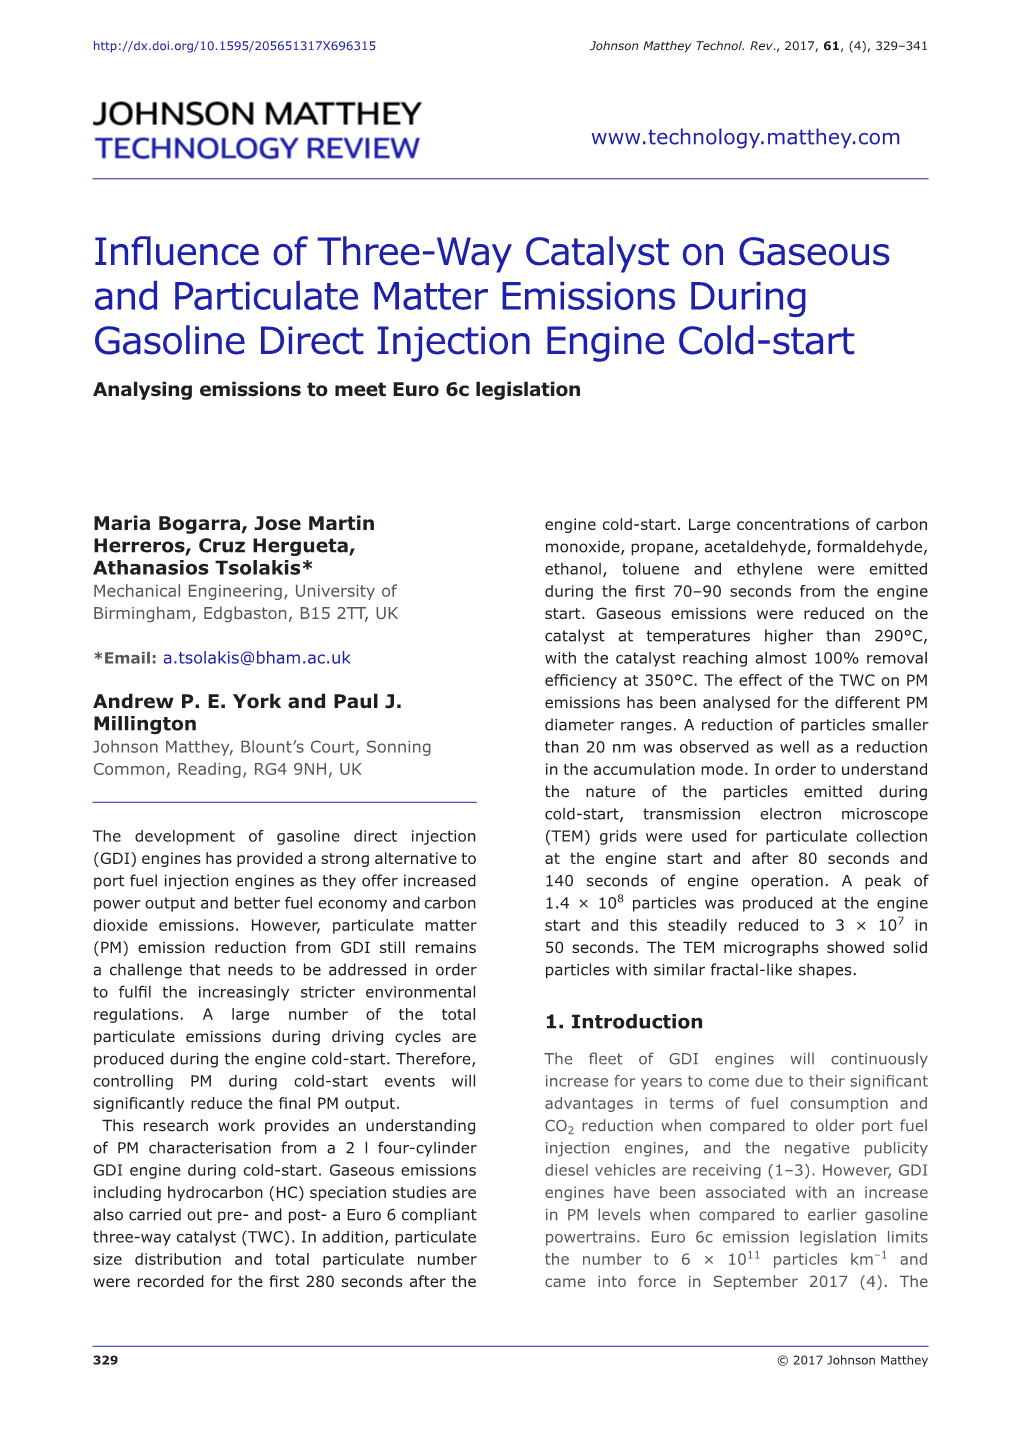 Influence of Three-Way Catalyst on Gaseous and Particulate Matter